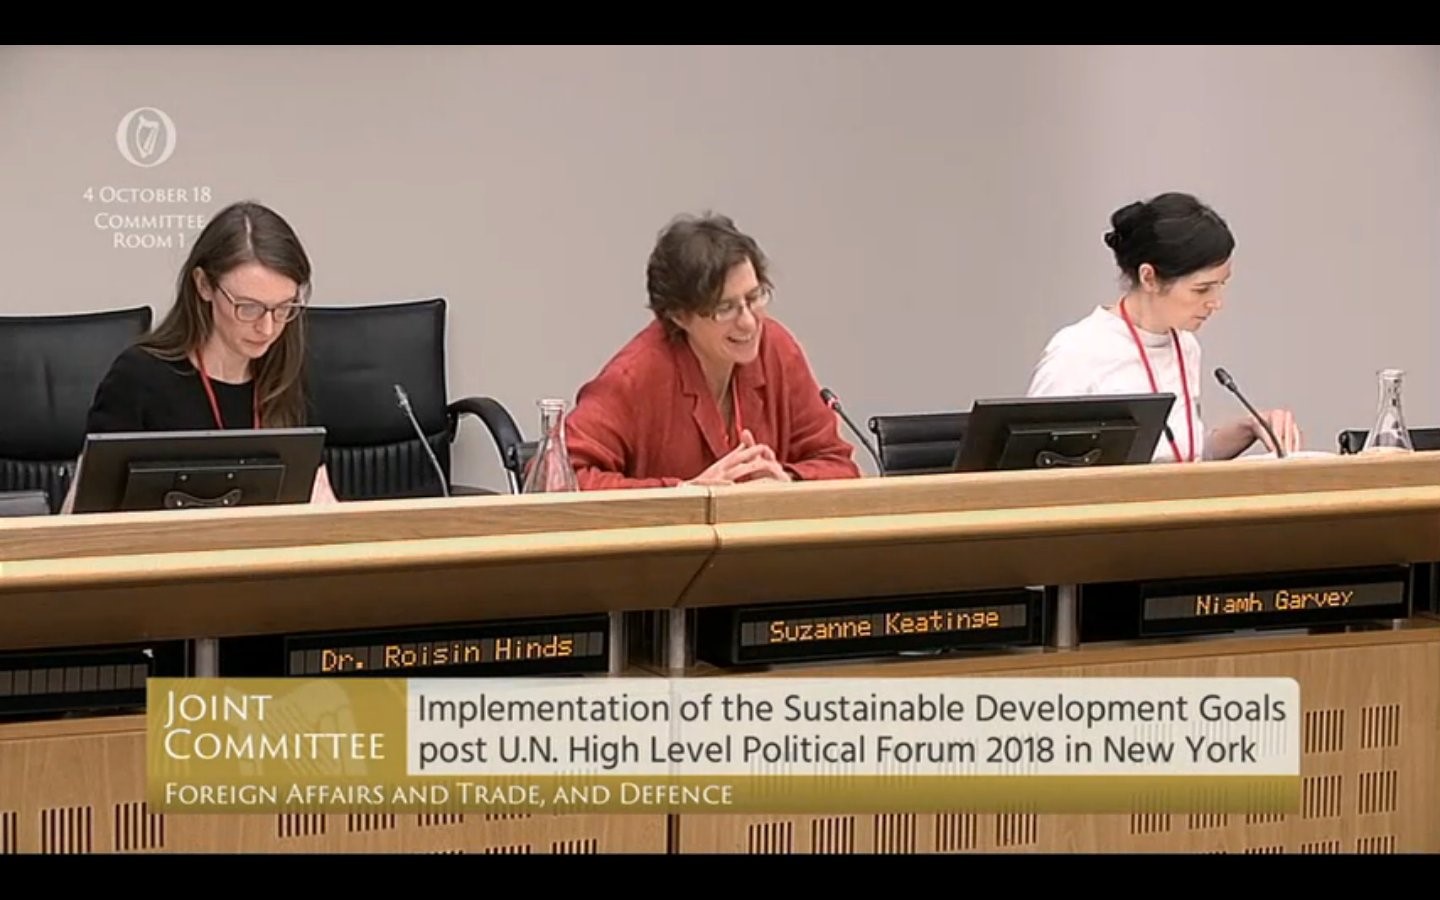 Róisín Hinds of Oxfam Ireland appearing before Joint Oireachtas Committee on Foreign Affairs and Trade with Suzanne Keatinge of Dóchas and Trócaire’s Niamh Garvey. Photo: Oireachtas TV